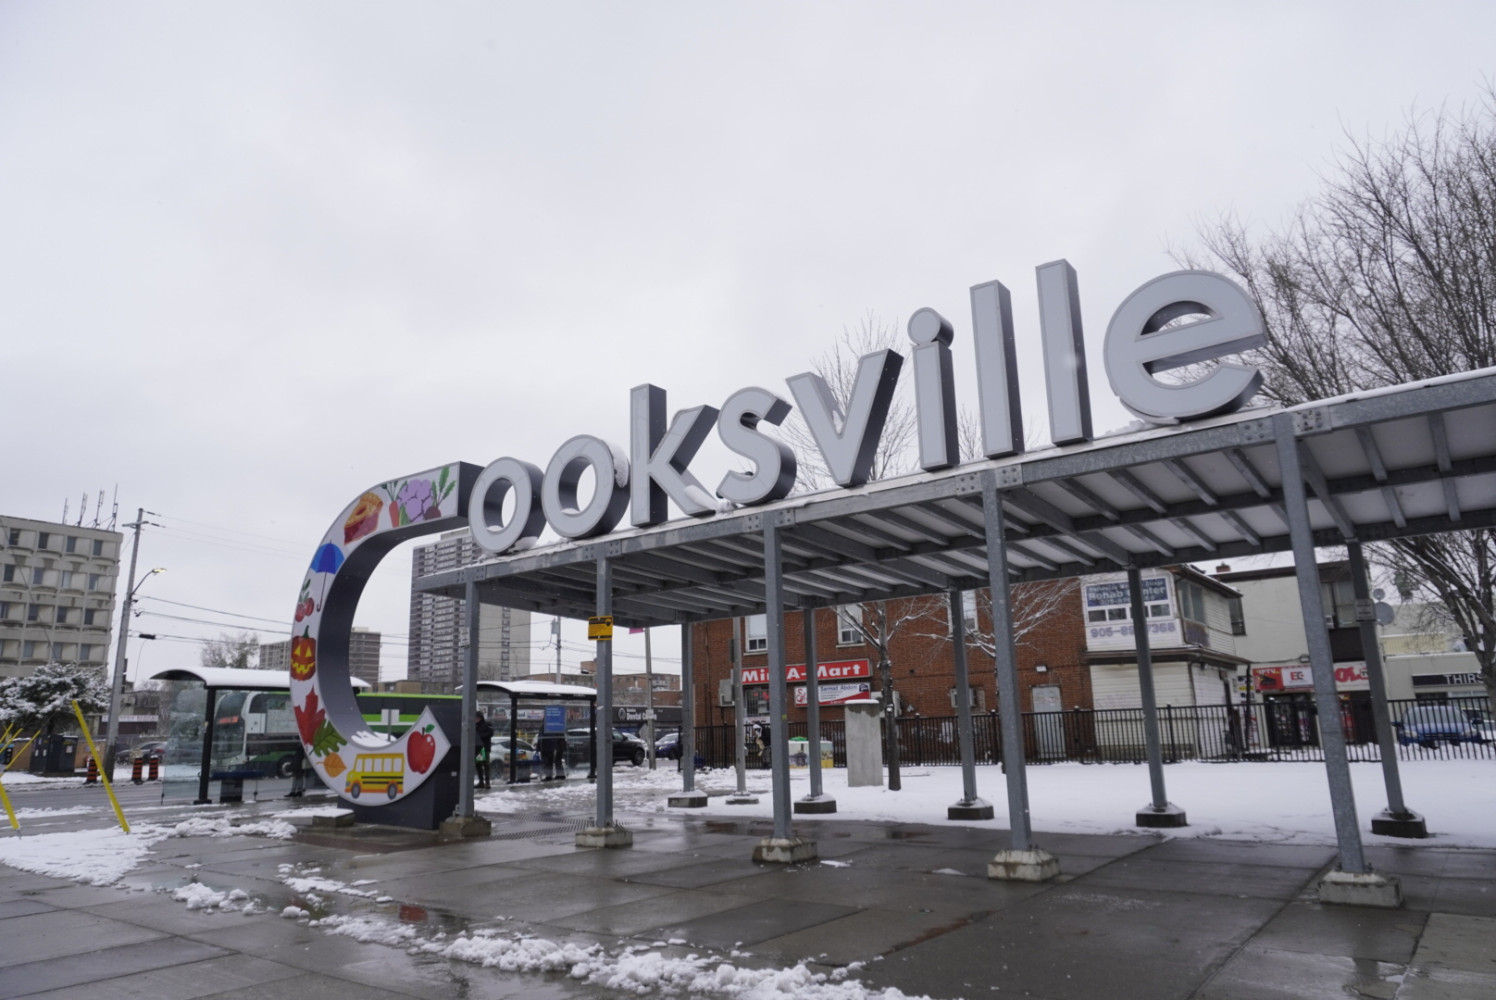 Cooksville businesses largely silent on proposed supervised consumption site to alleviate overdose crisis